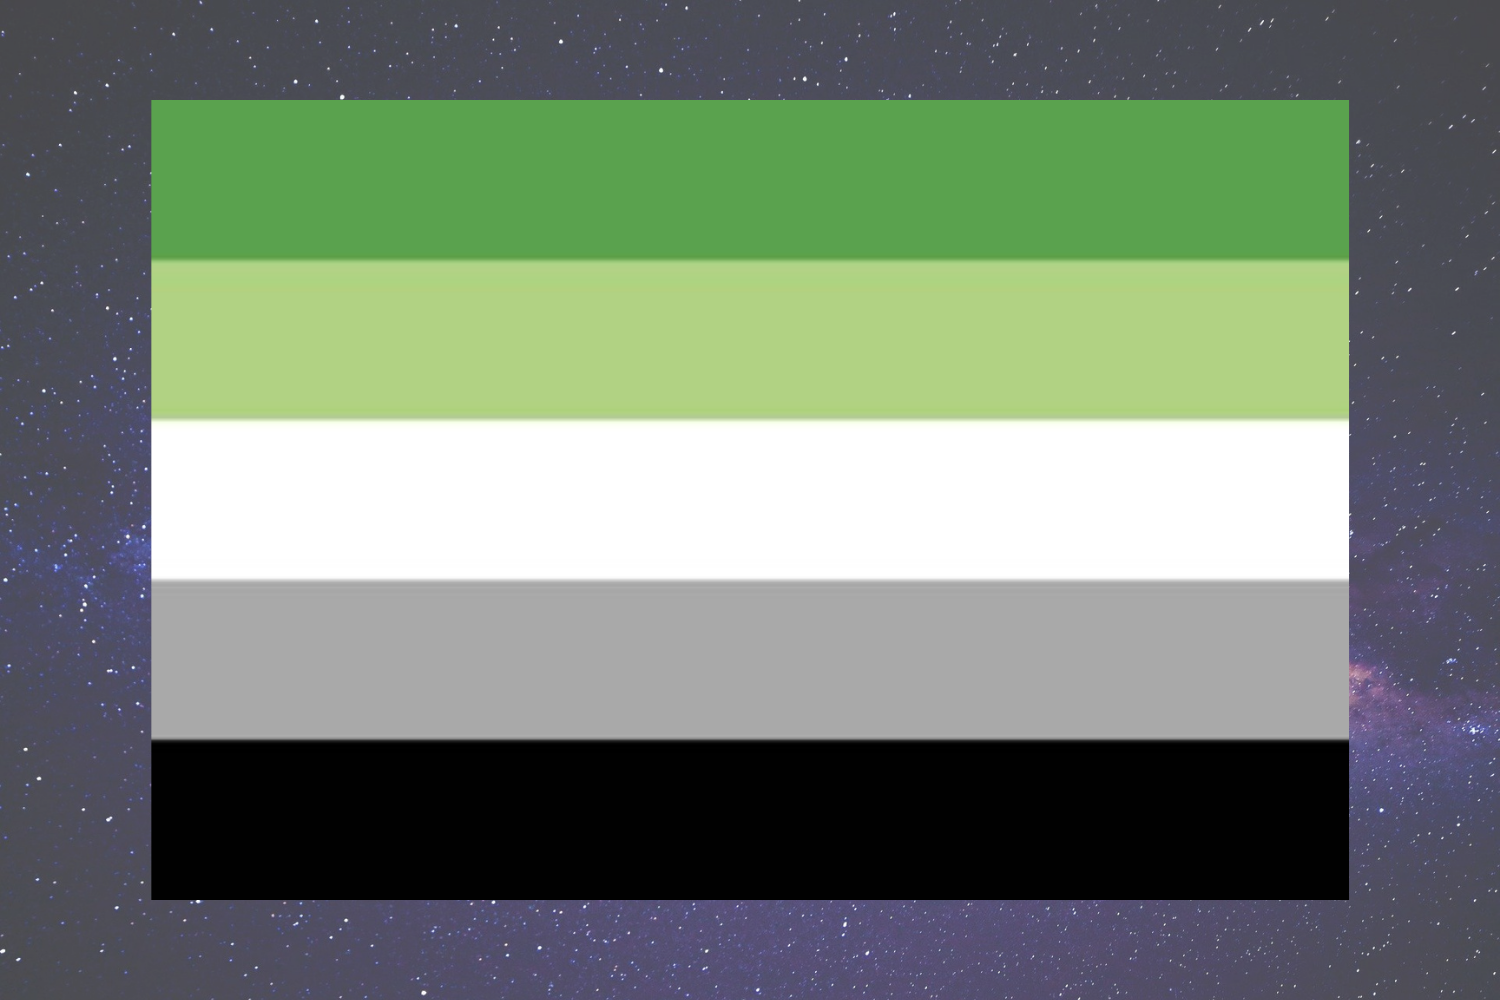 The Aromantic Flag -  A flag with 5 horizontal stripes: top to bottom: dark green, light green, white, grey, and black. The greens represent the spectrum of aromantic experiences. The white, grey, and black representing the sexual identities of individuals within the aromantic spectrum.